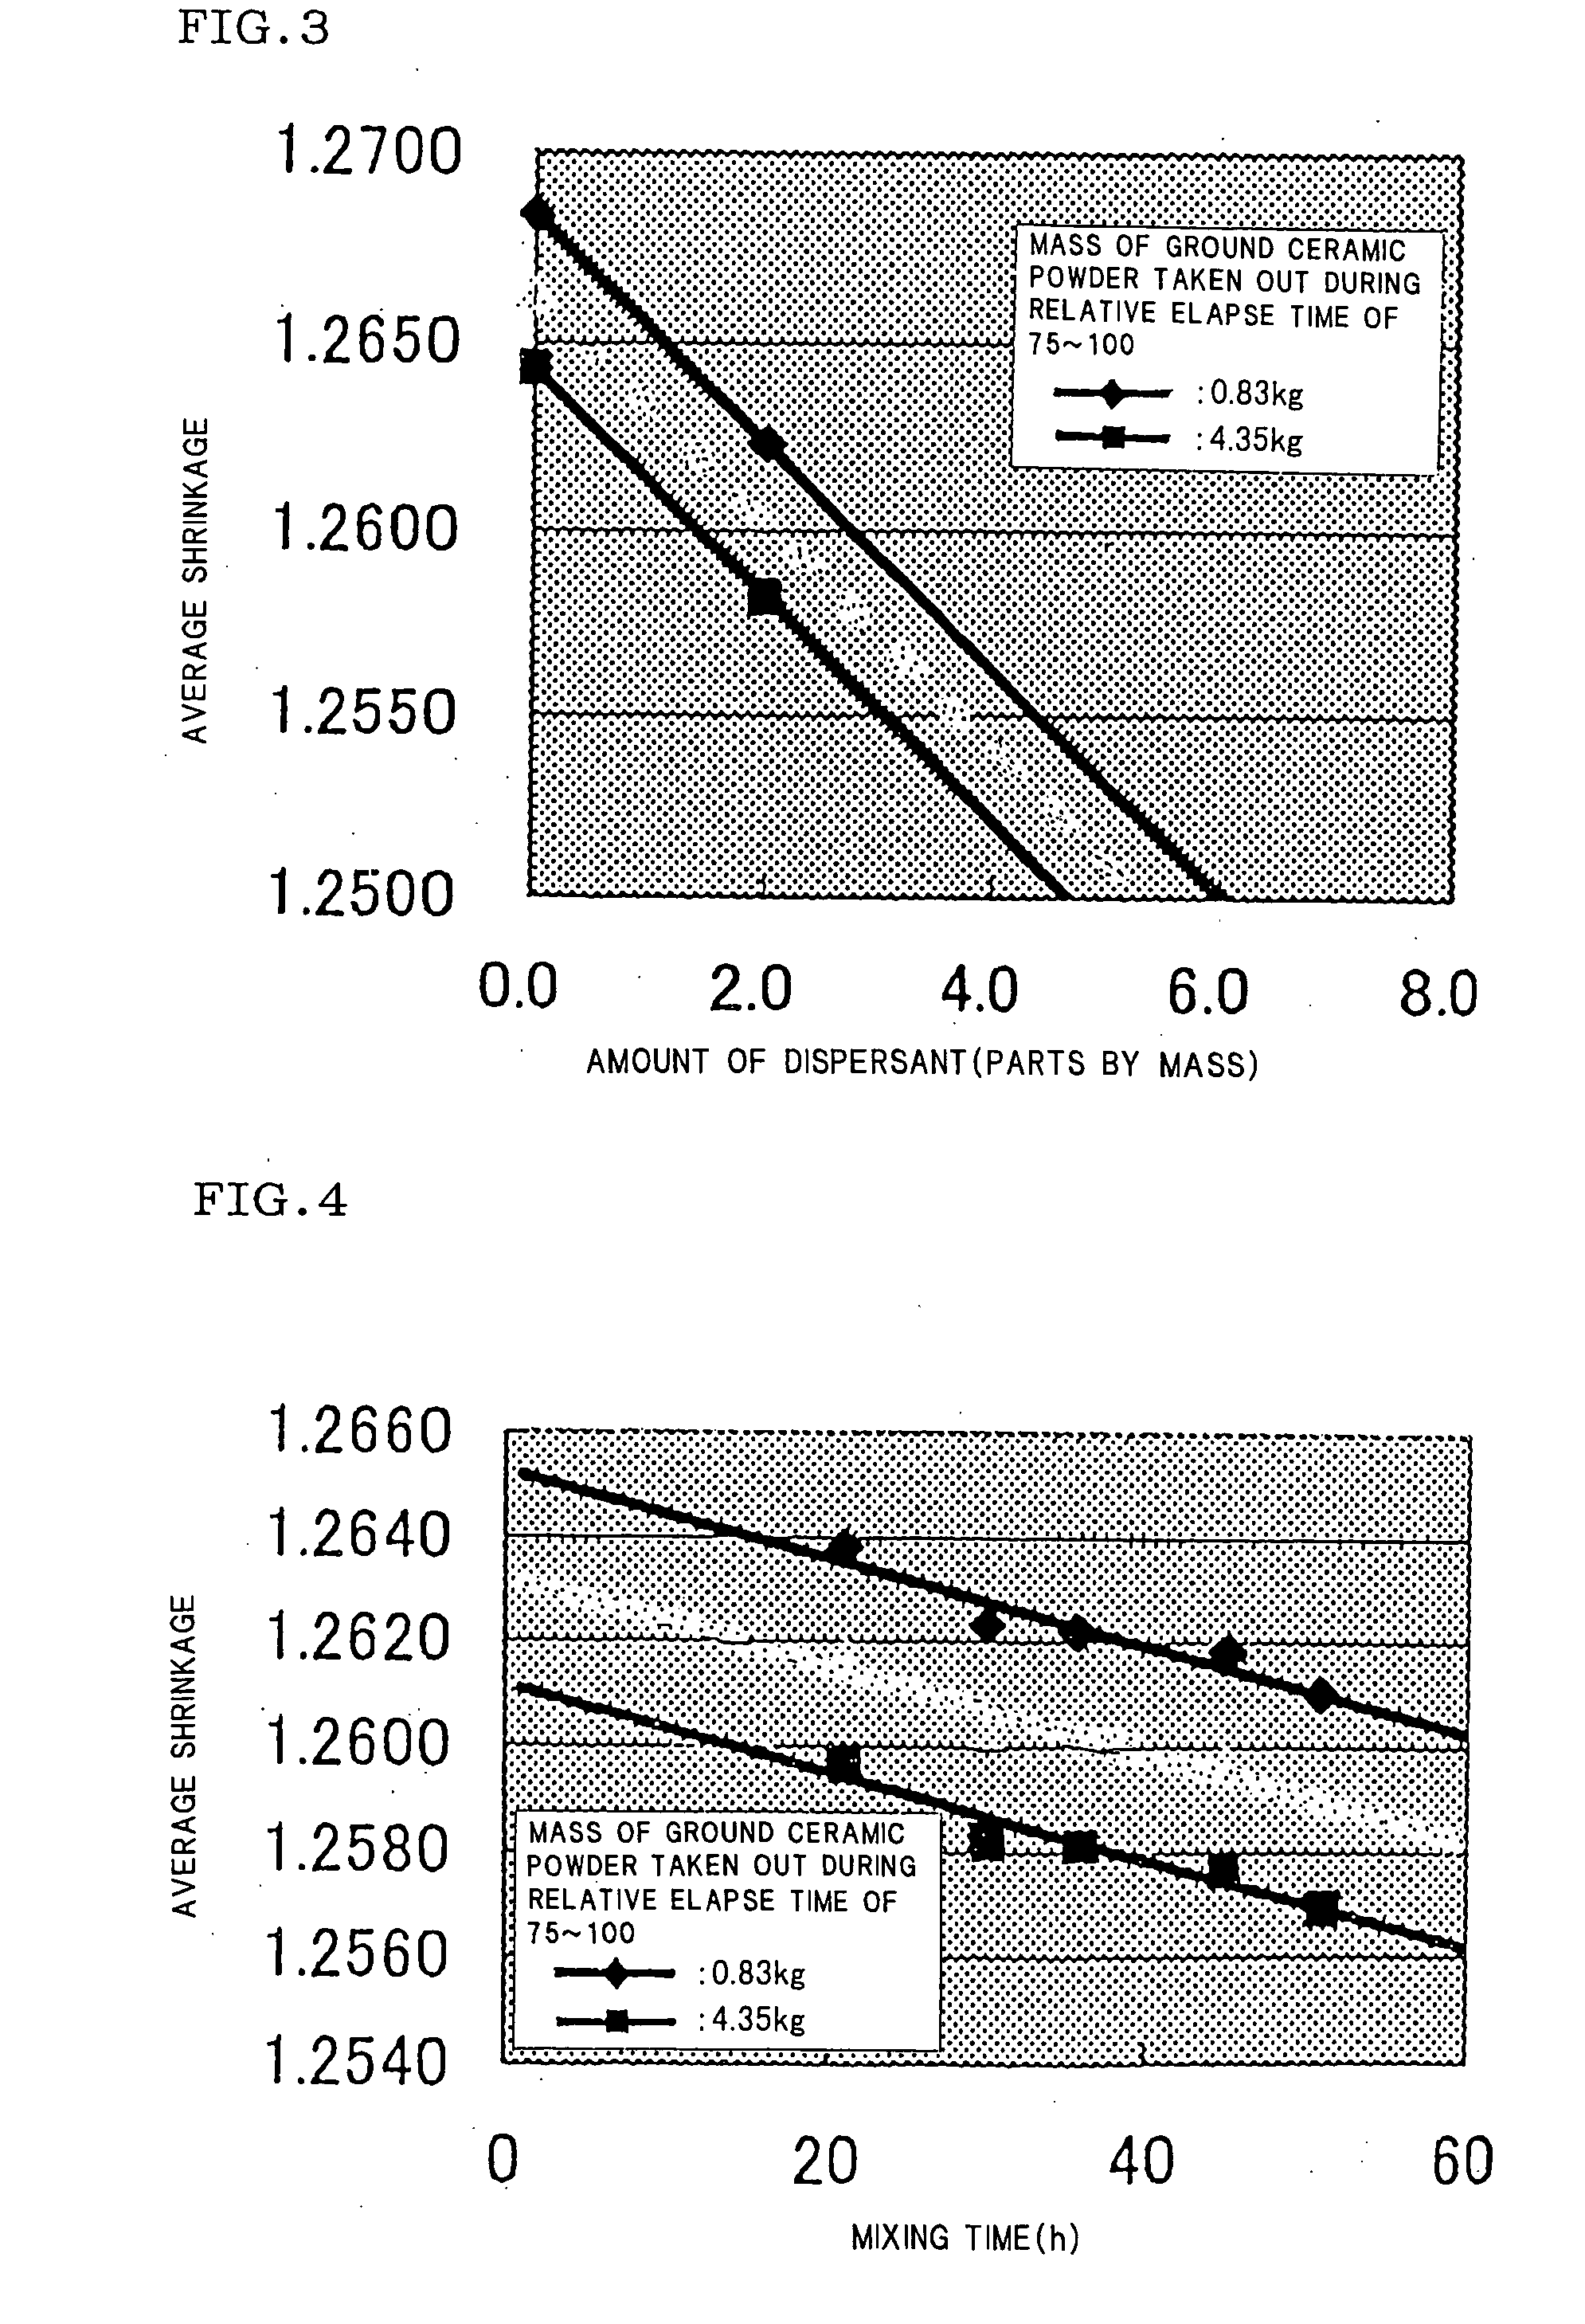 Method for controlling shrinkage of formed ceramic body